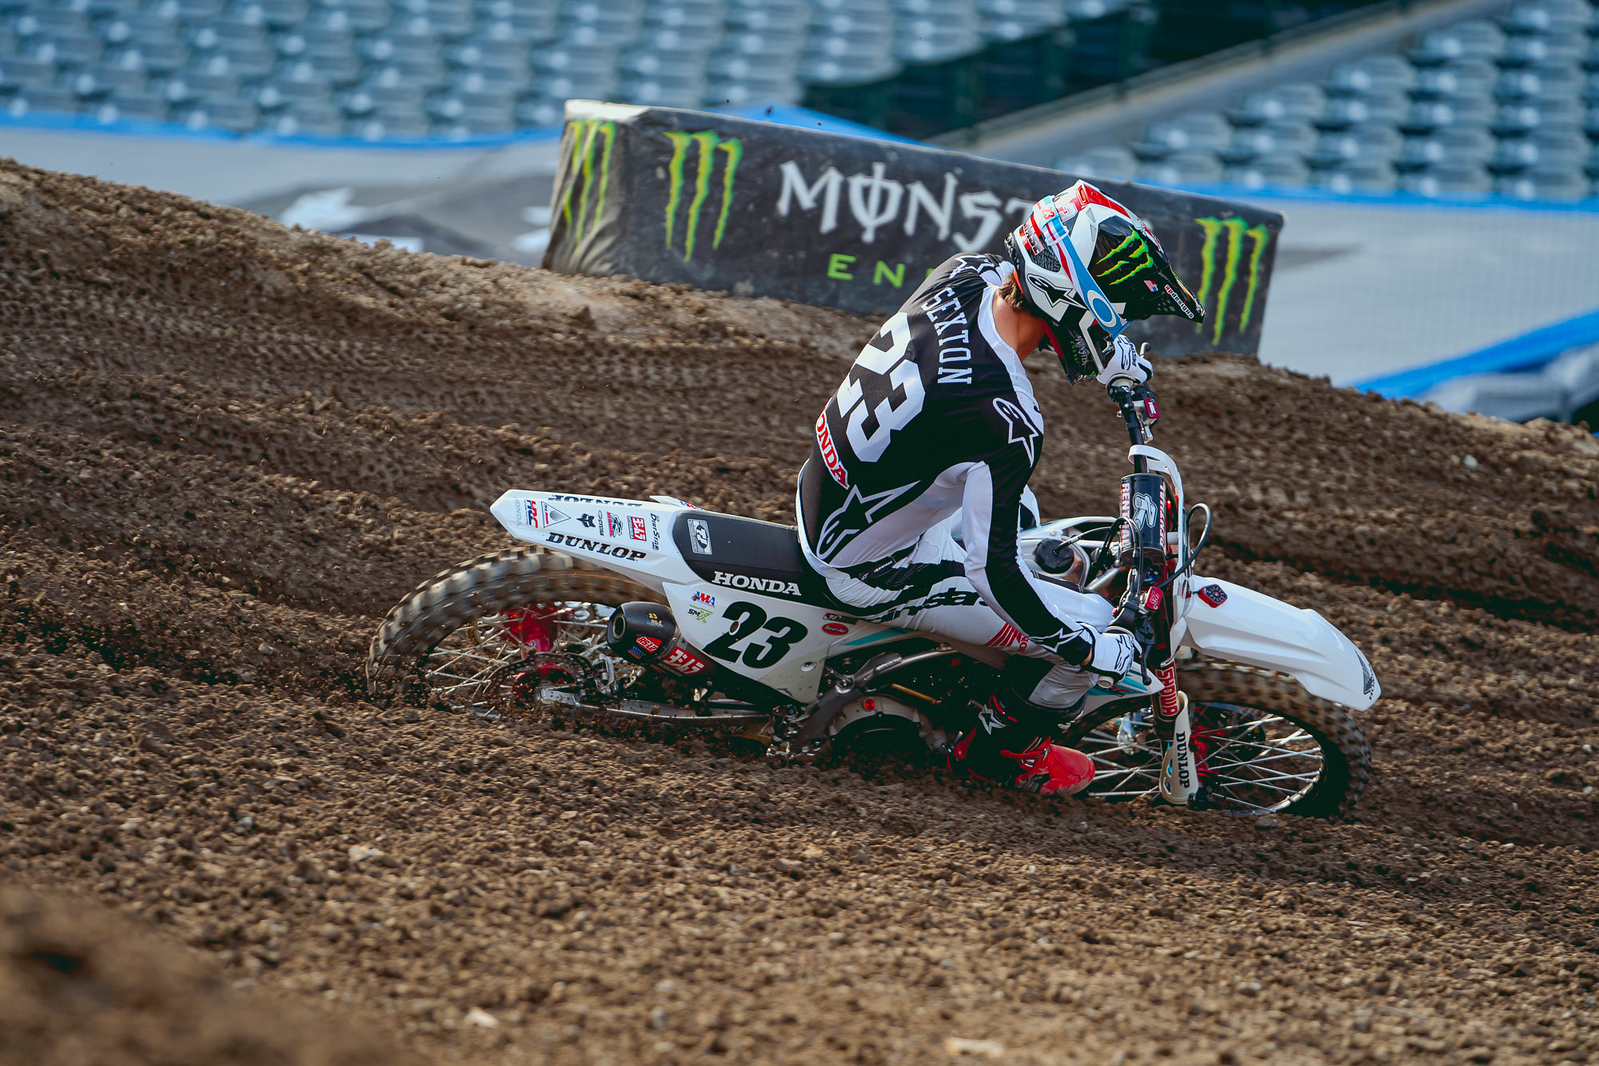 2023 Anaheim Two Supercross Qualifying Report and Times